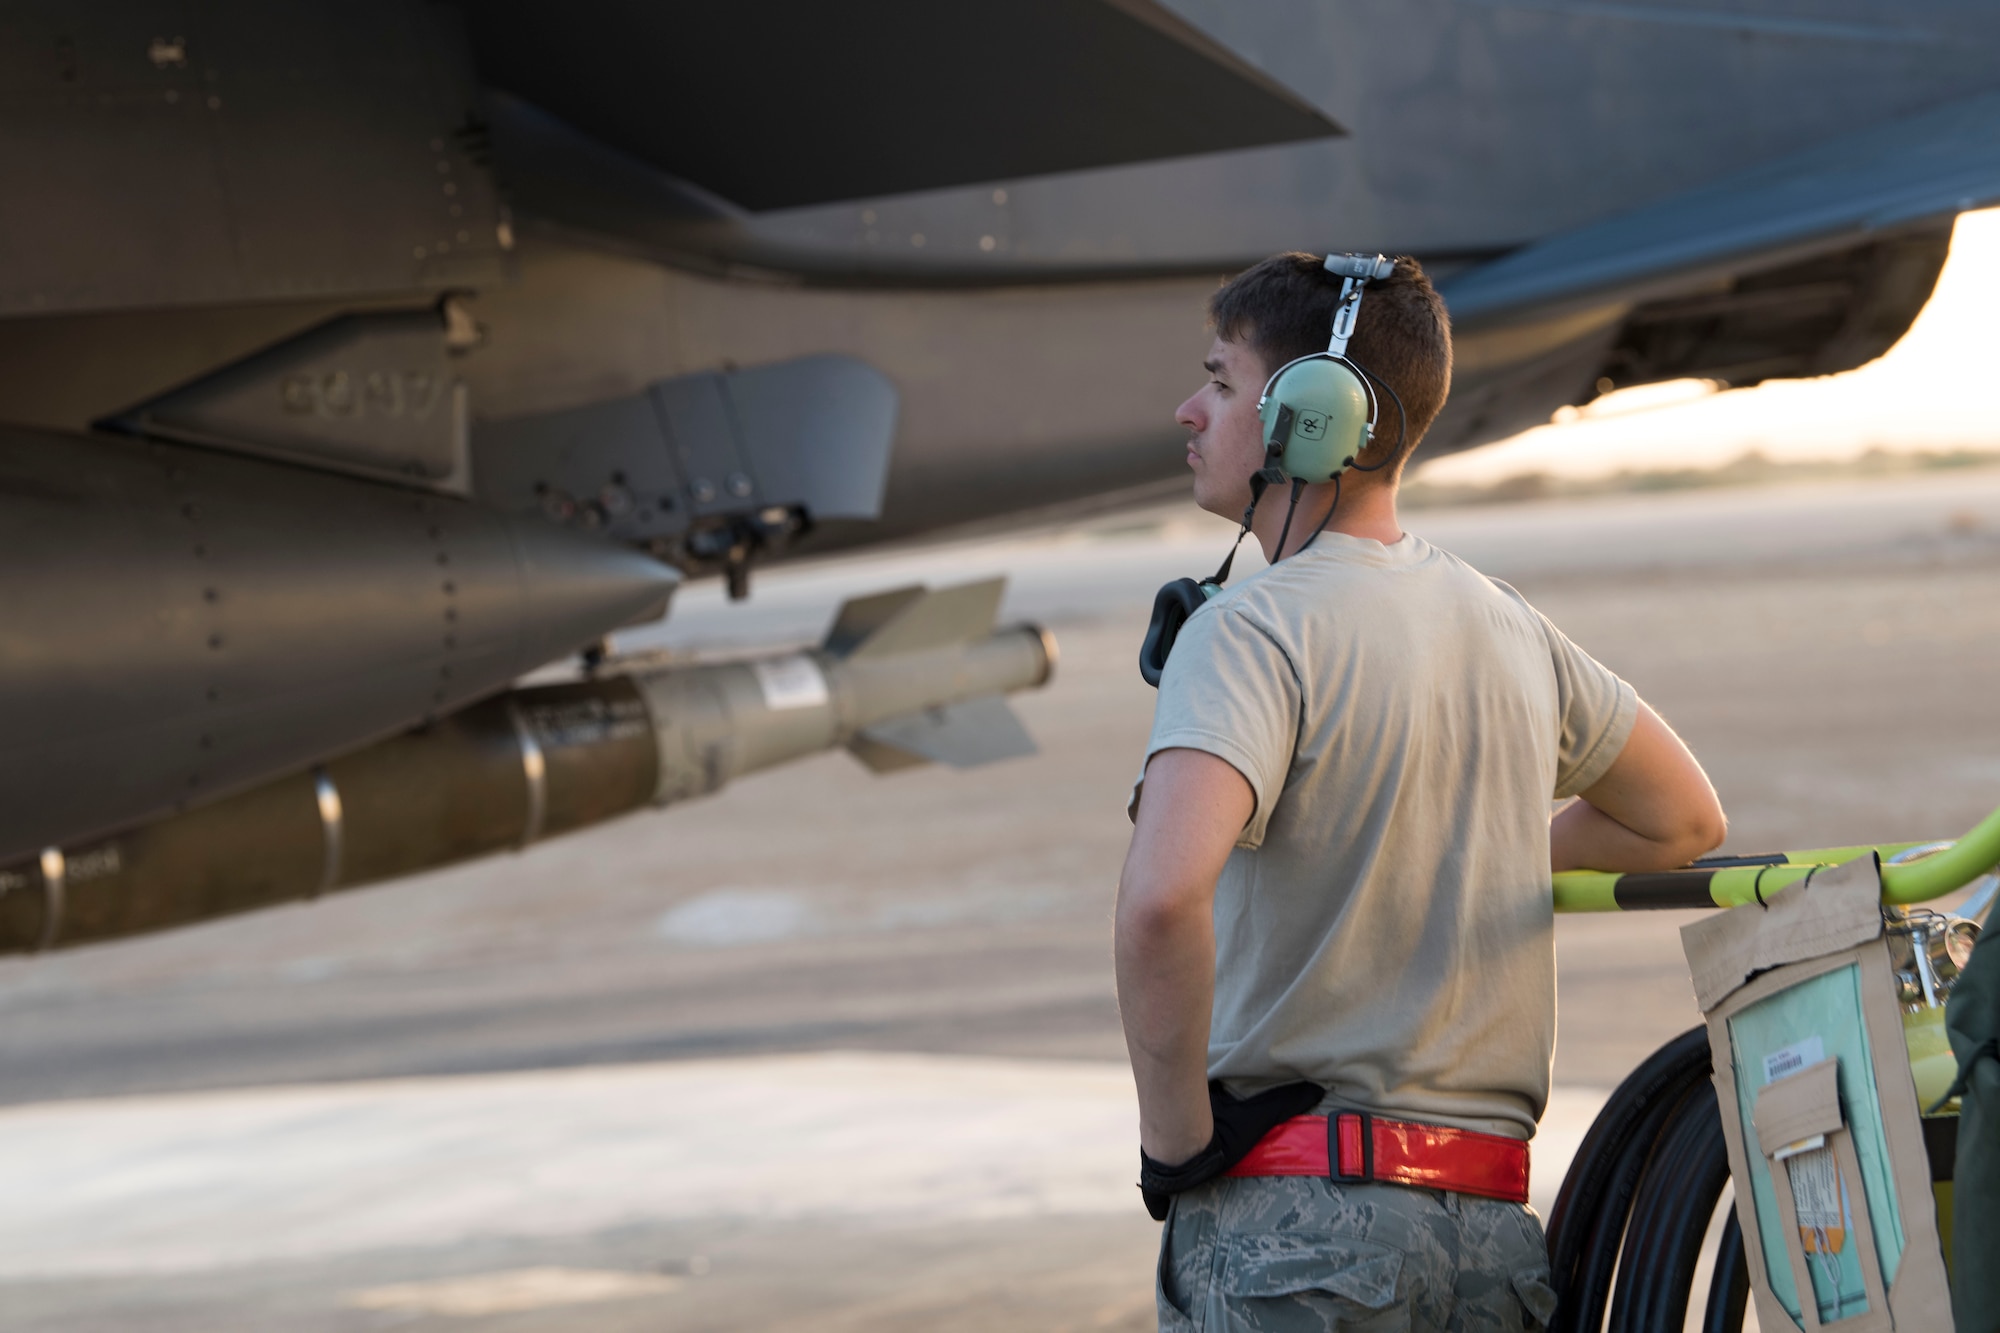 A 332nd Expeditionary Maintenance Squadron Airman observes an F-15E Strike Eagle during its engine performance checks April 8, 2018, at an undisclosed location in Southwest Asia.